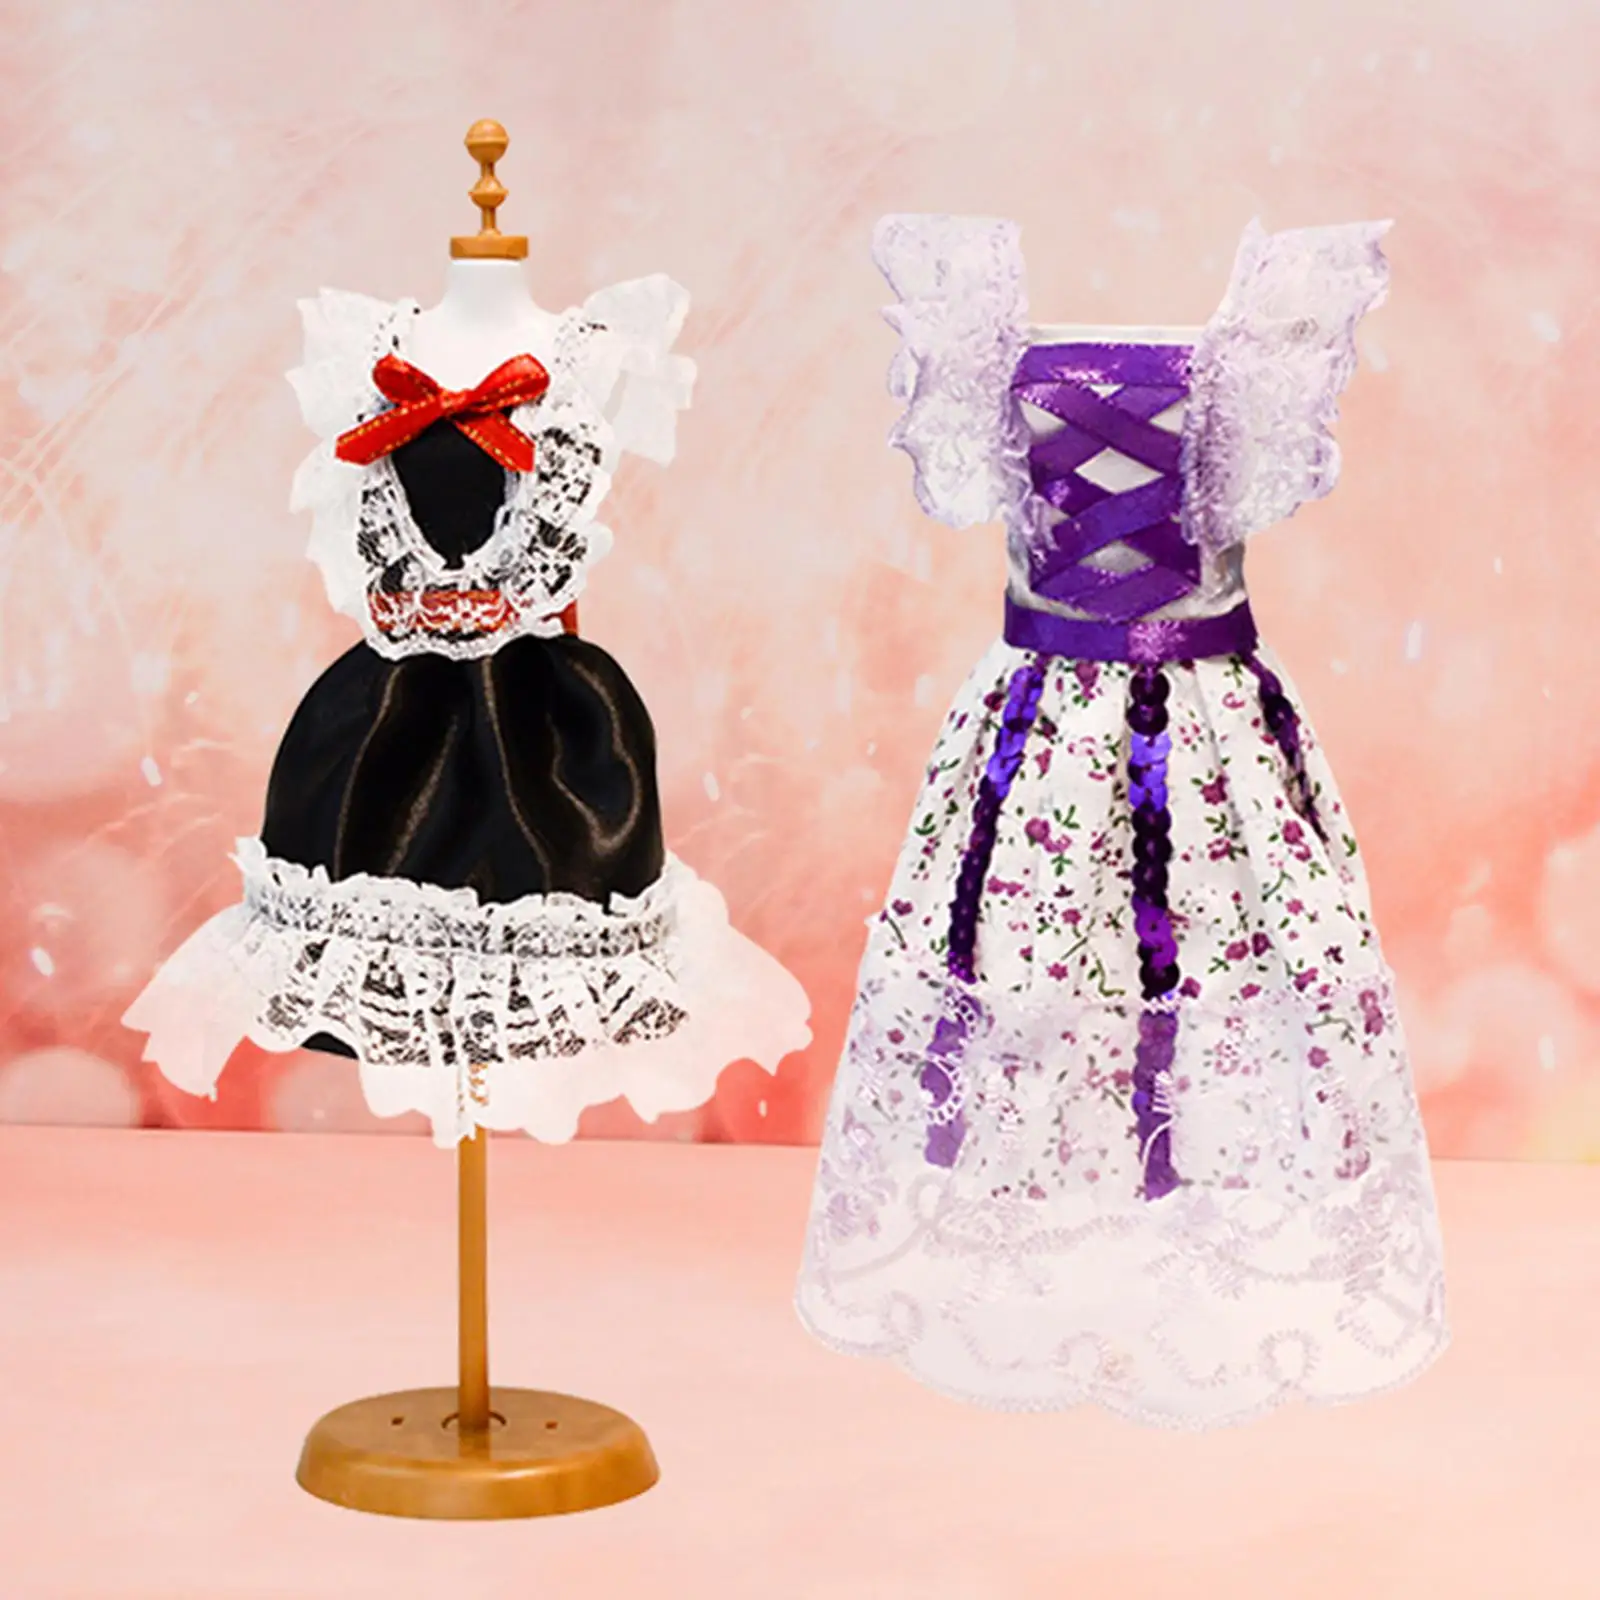 Kids' Sewing Kits Doll Clothes Dress with Mannequin Creativity Learning Toys Arts and Crafts Fashion Design Kit for Girls Teen